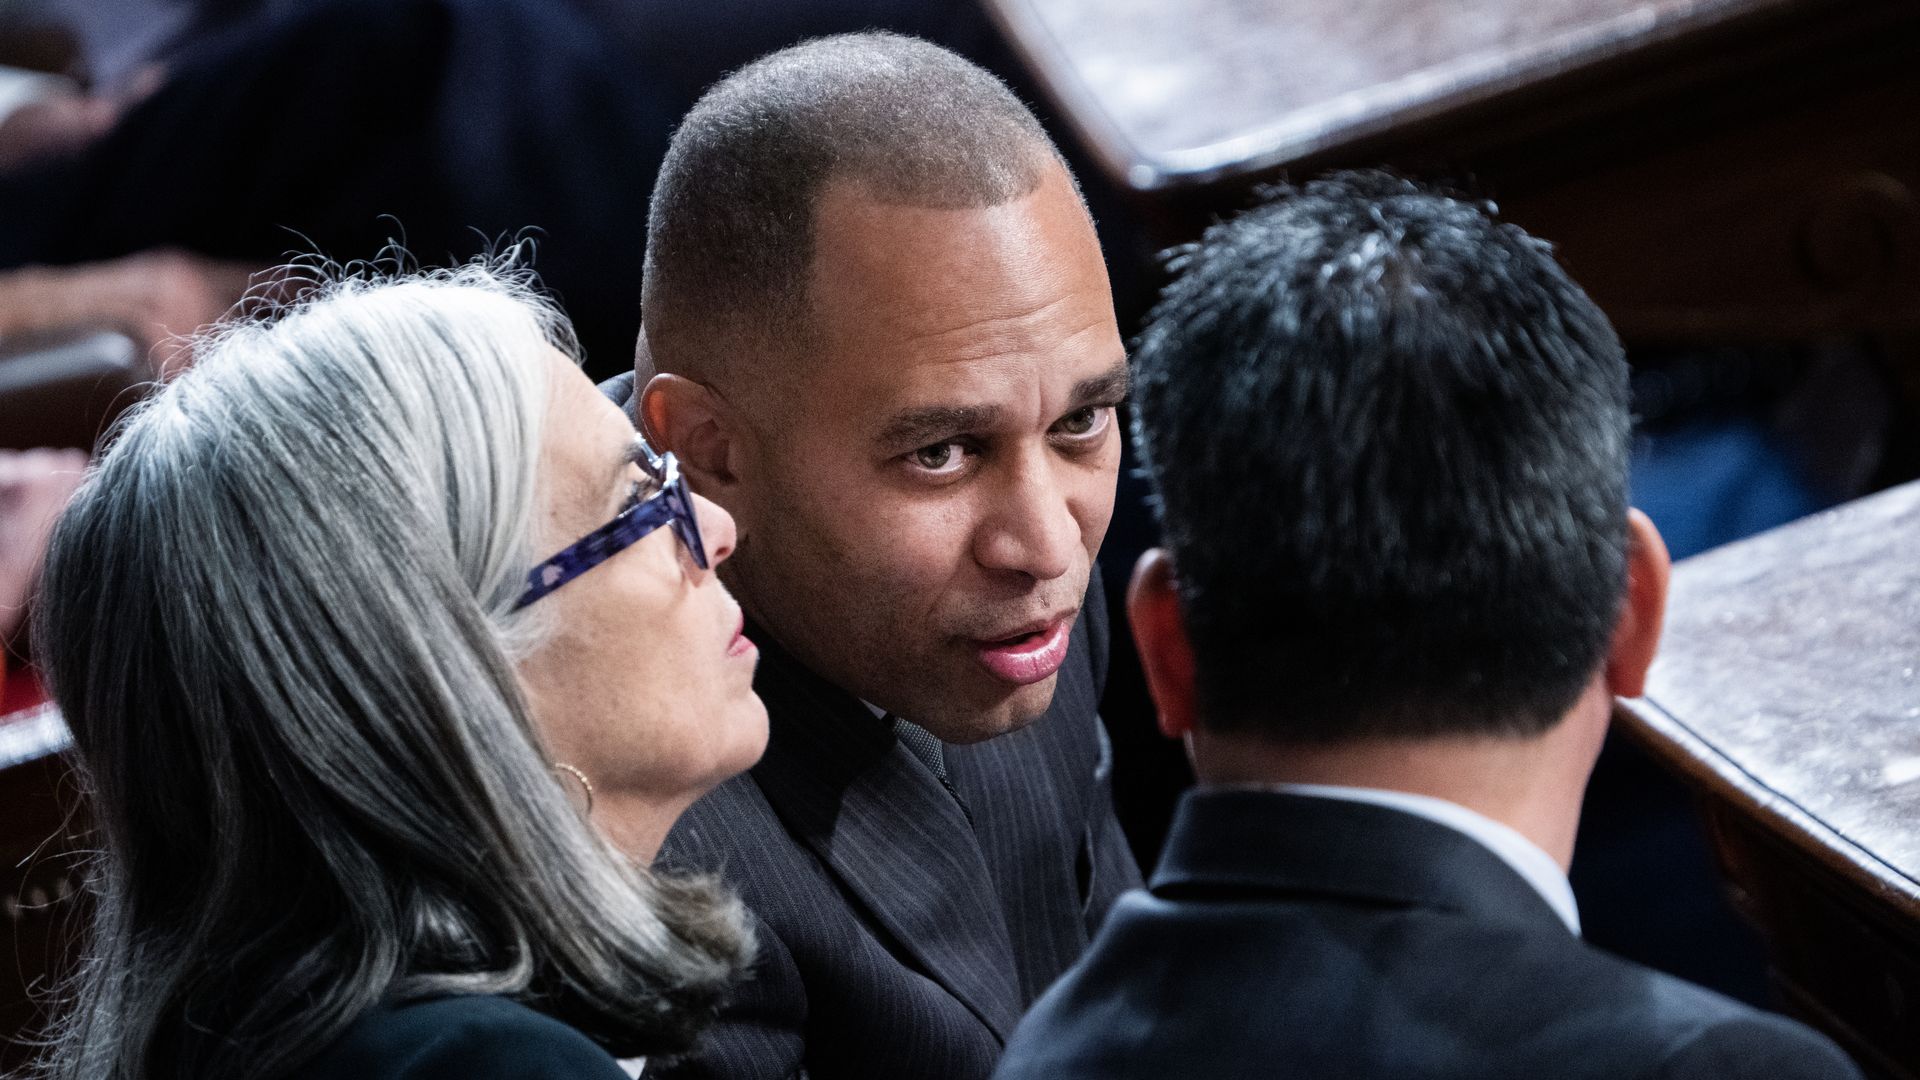 House Democratic Whip Katherine Clark, Leader Hakeem Jeffries and Caucus Chair Pete Aguilar.